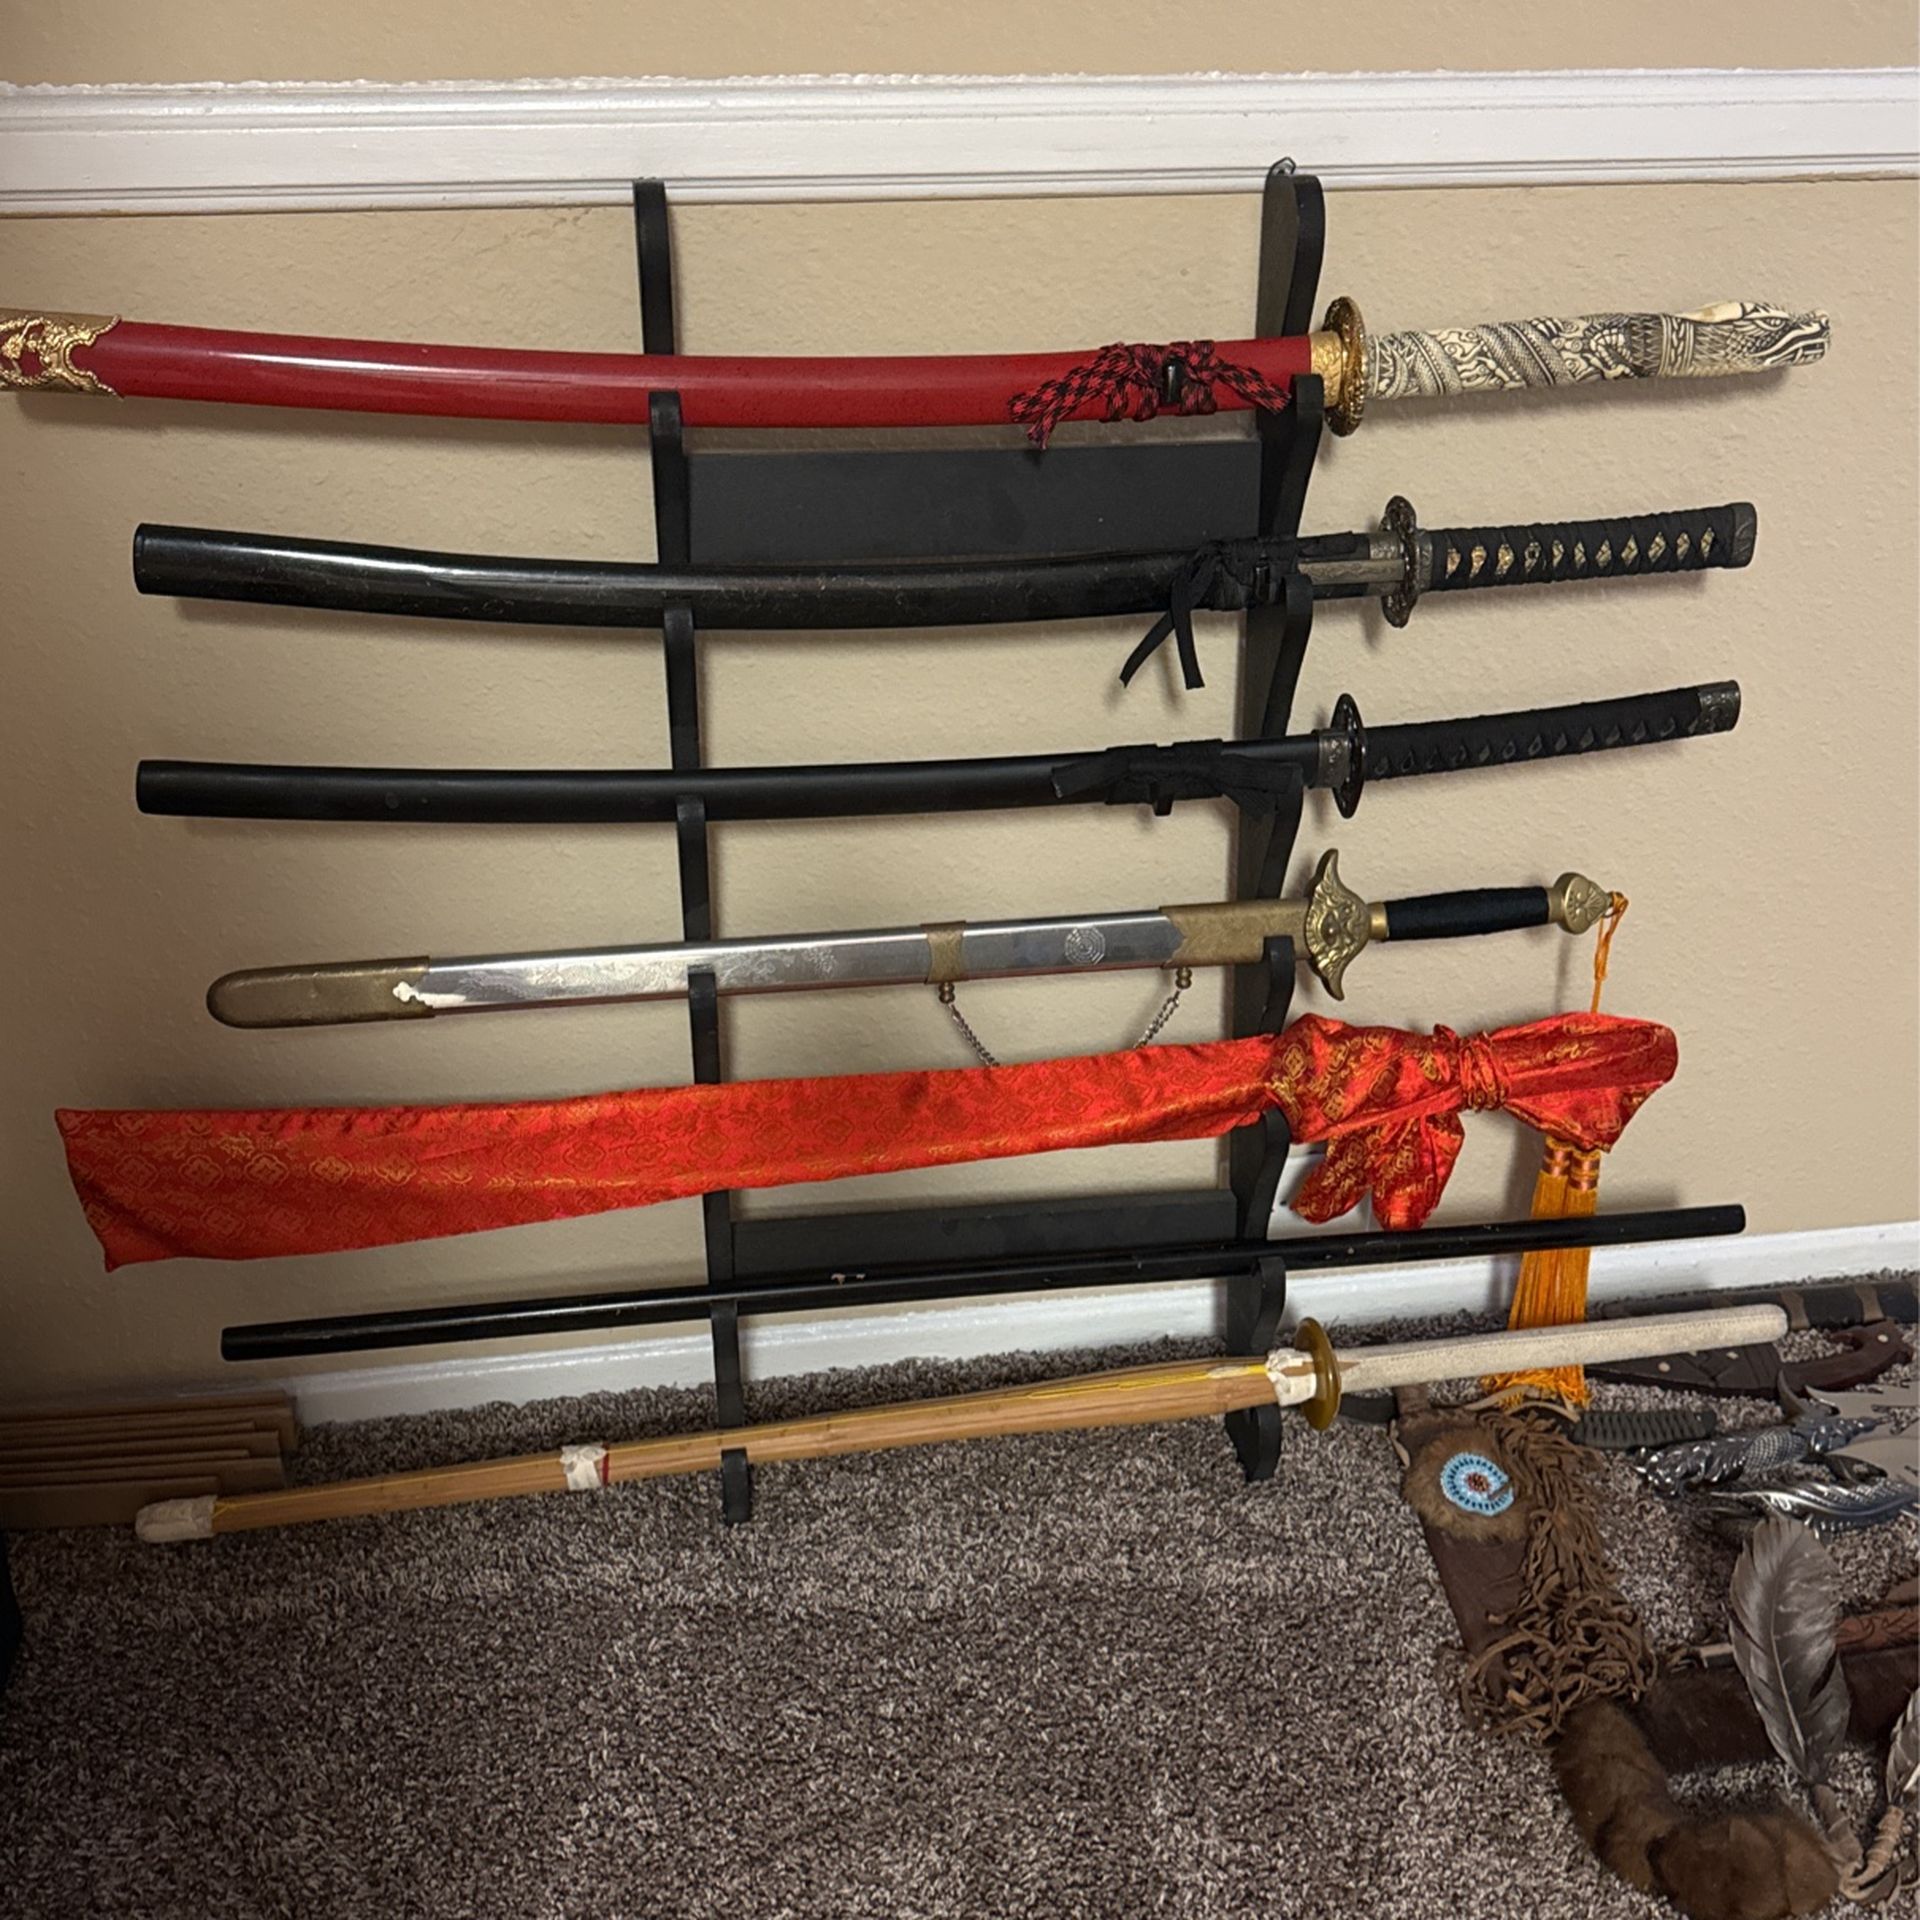 Weapons collection “toy” swords, knives, blades, Indian staff, Hanwei Shinto